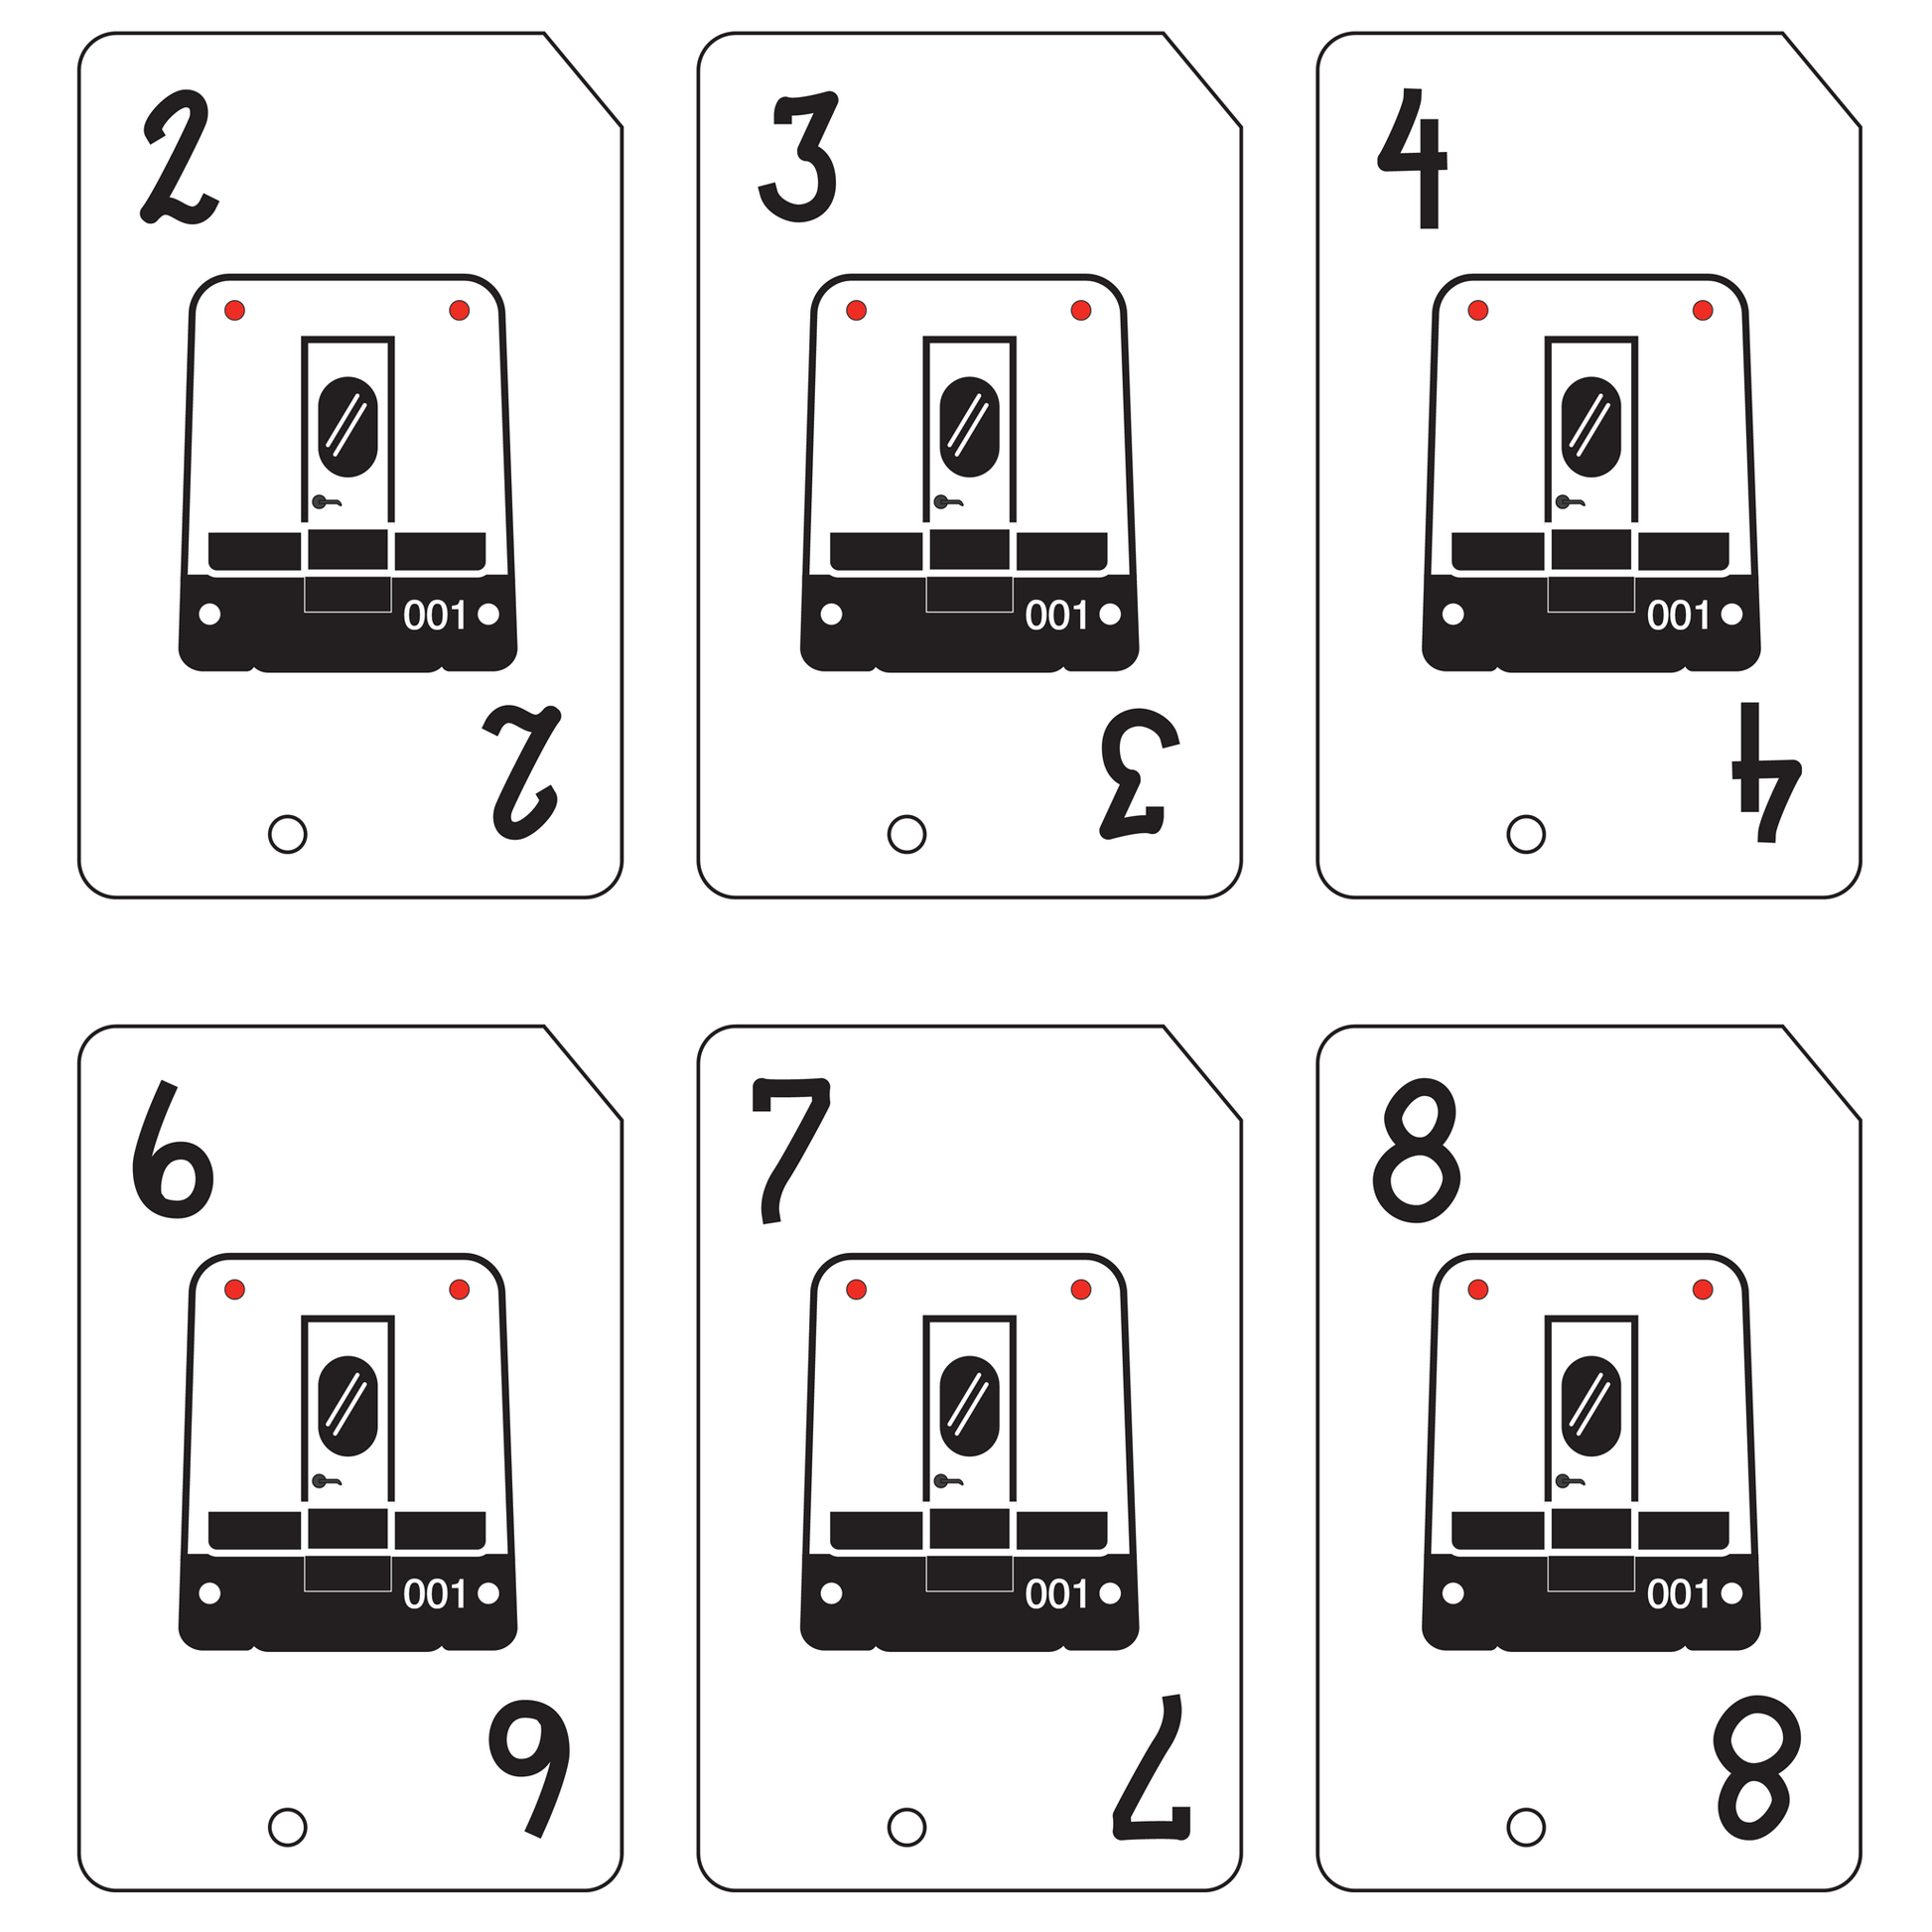 Layout of several cards of the SkyTrain suit.